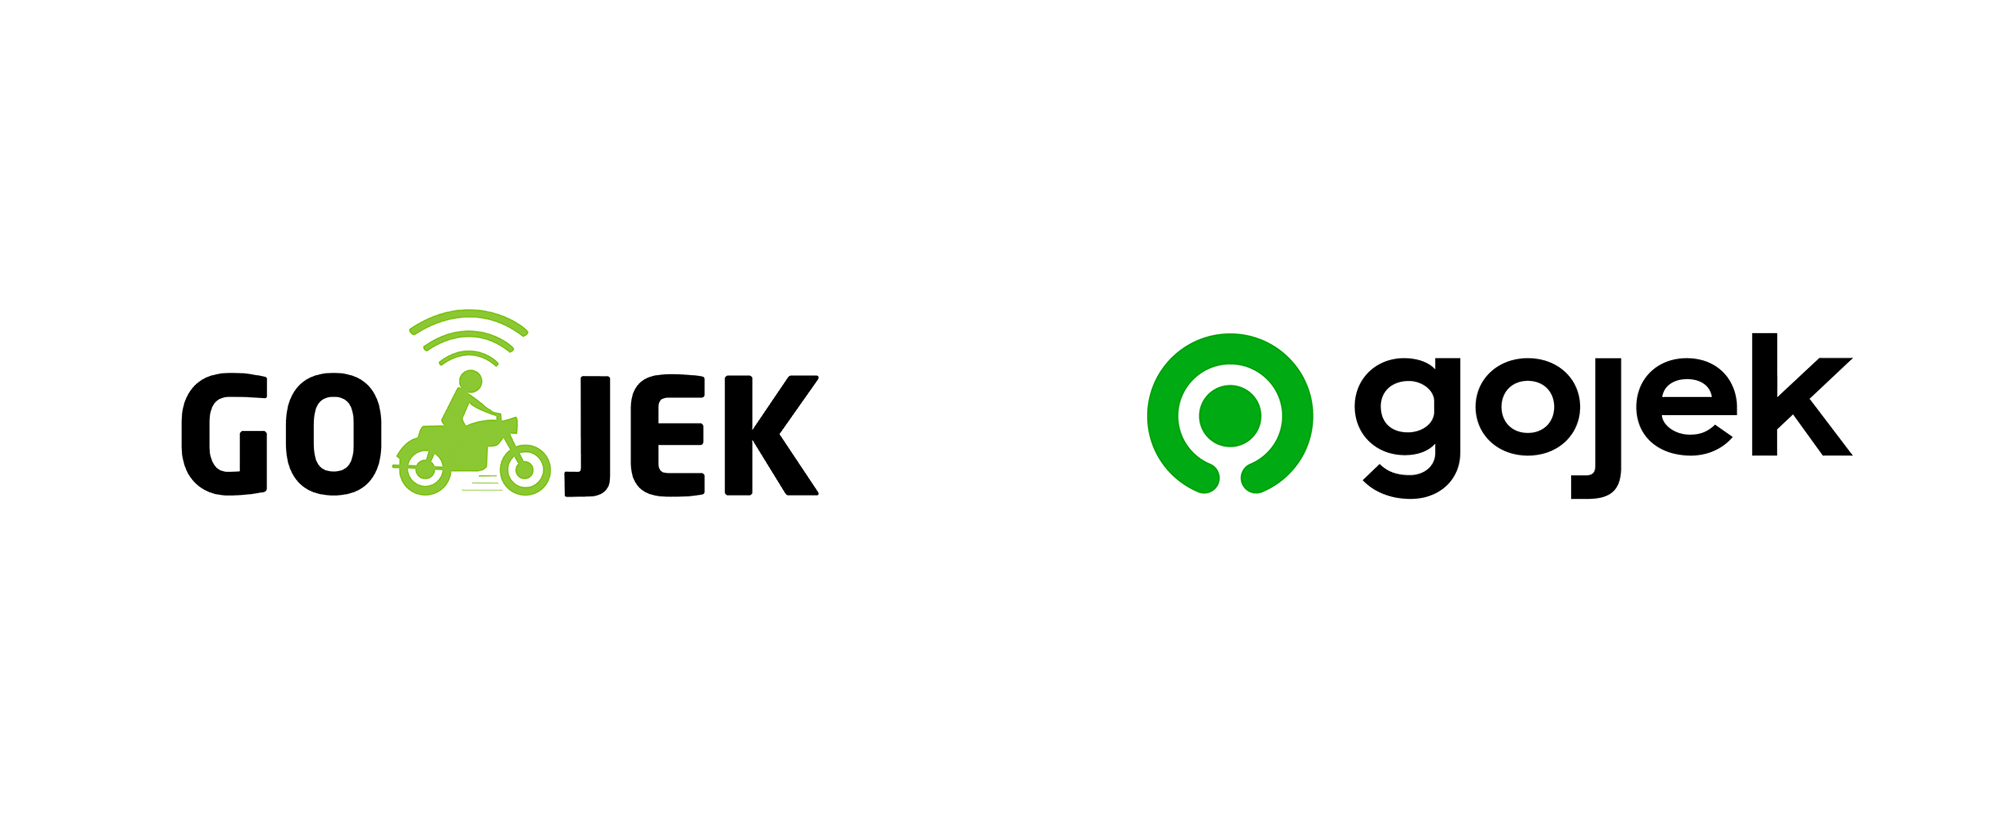 People.com Logo - Brand New: New Logo and Identity for Gojek done In-house